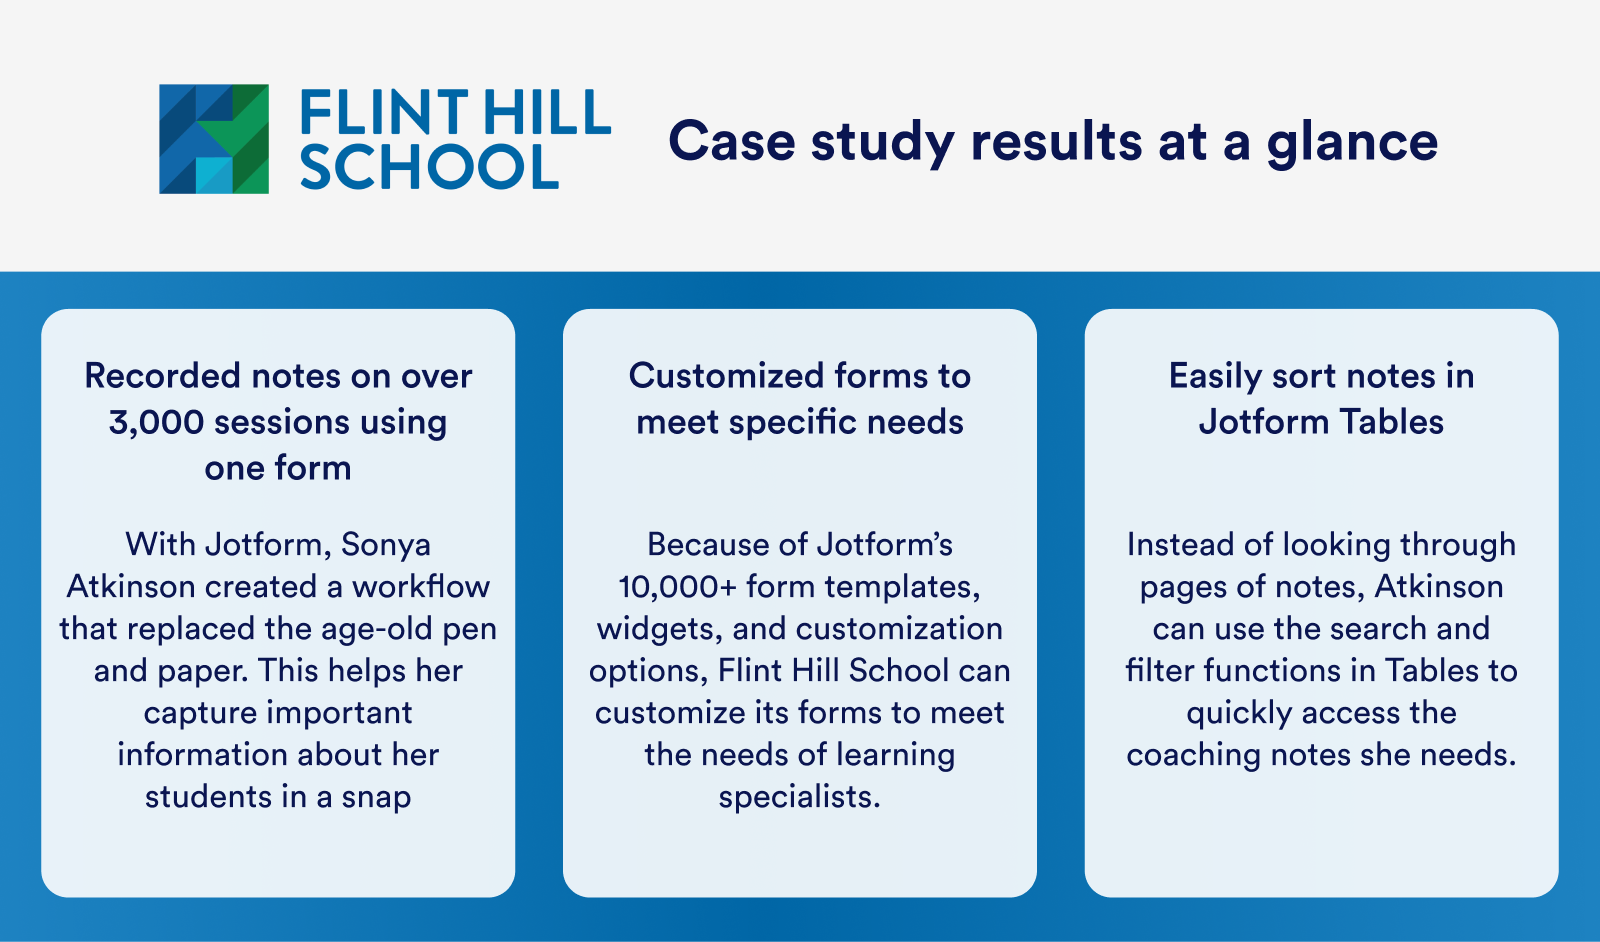 Flint High School's Case Study Results at a Glance Viewed in Three Different Columns